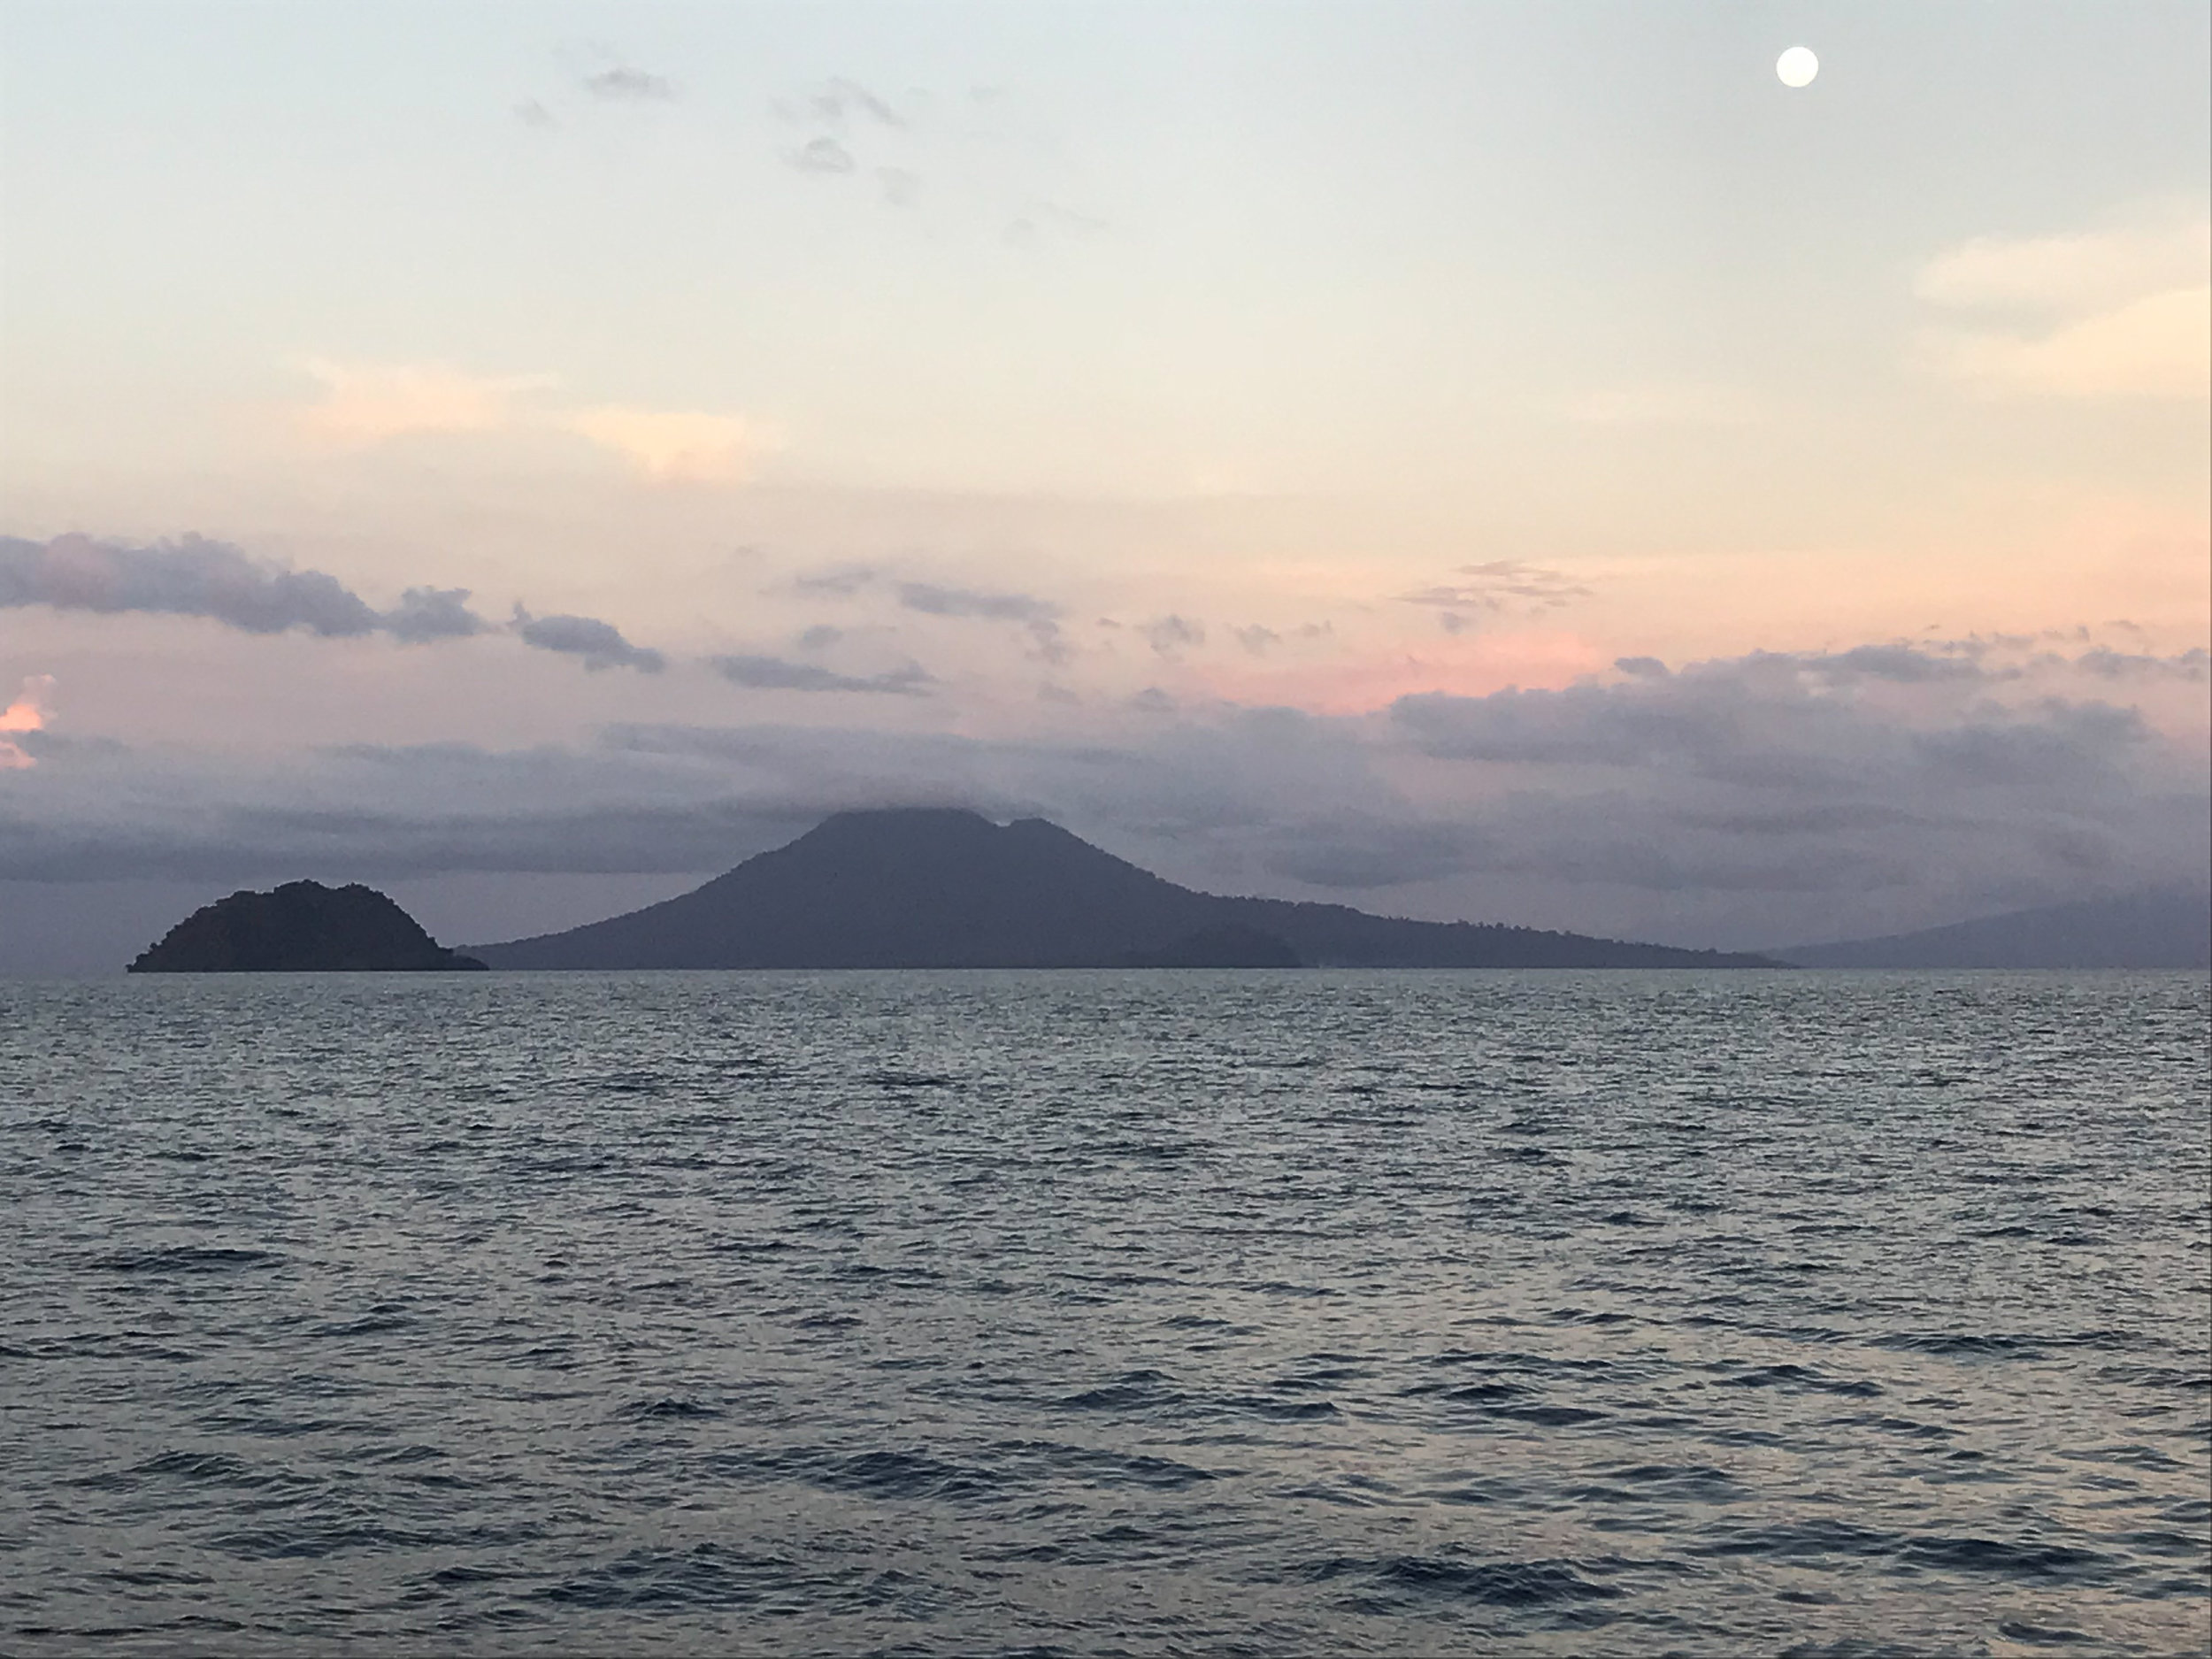 Volcano from Meil's Reef at sunrise, Father's Reefs